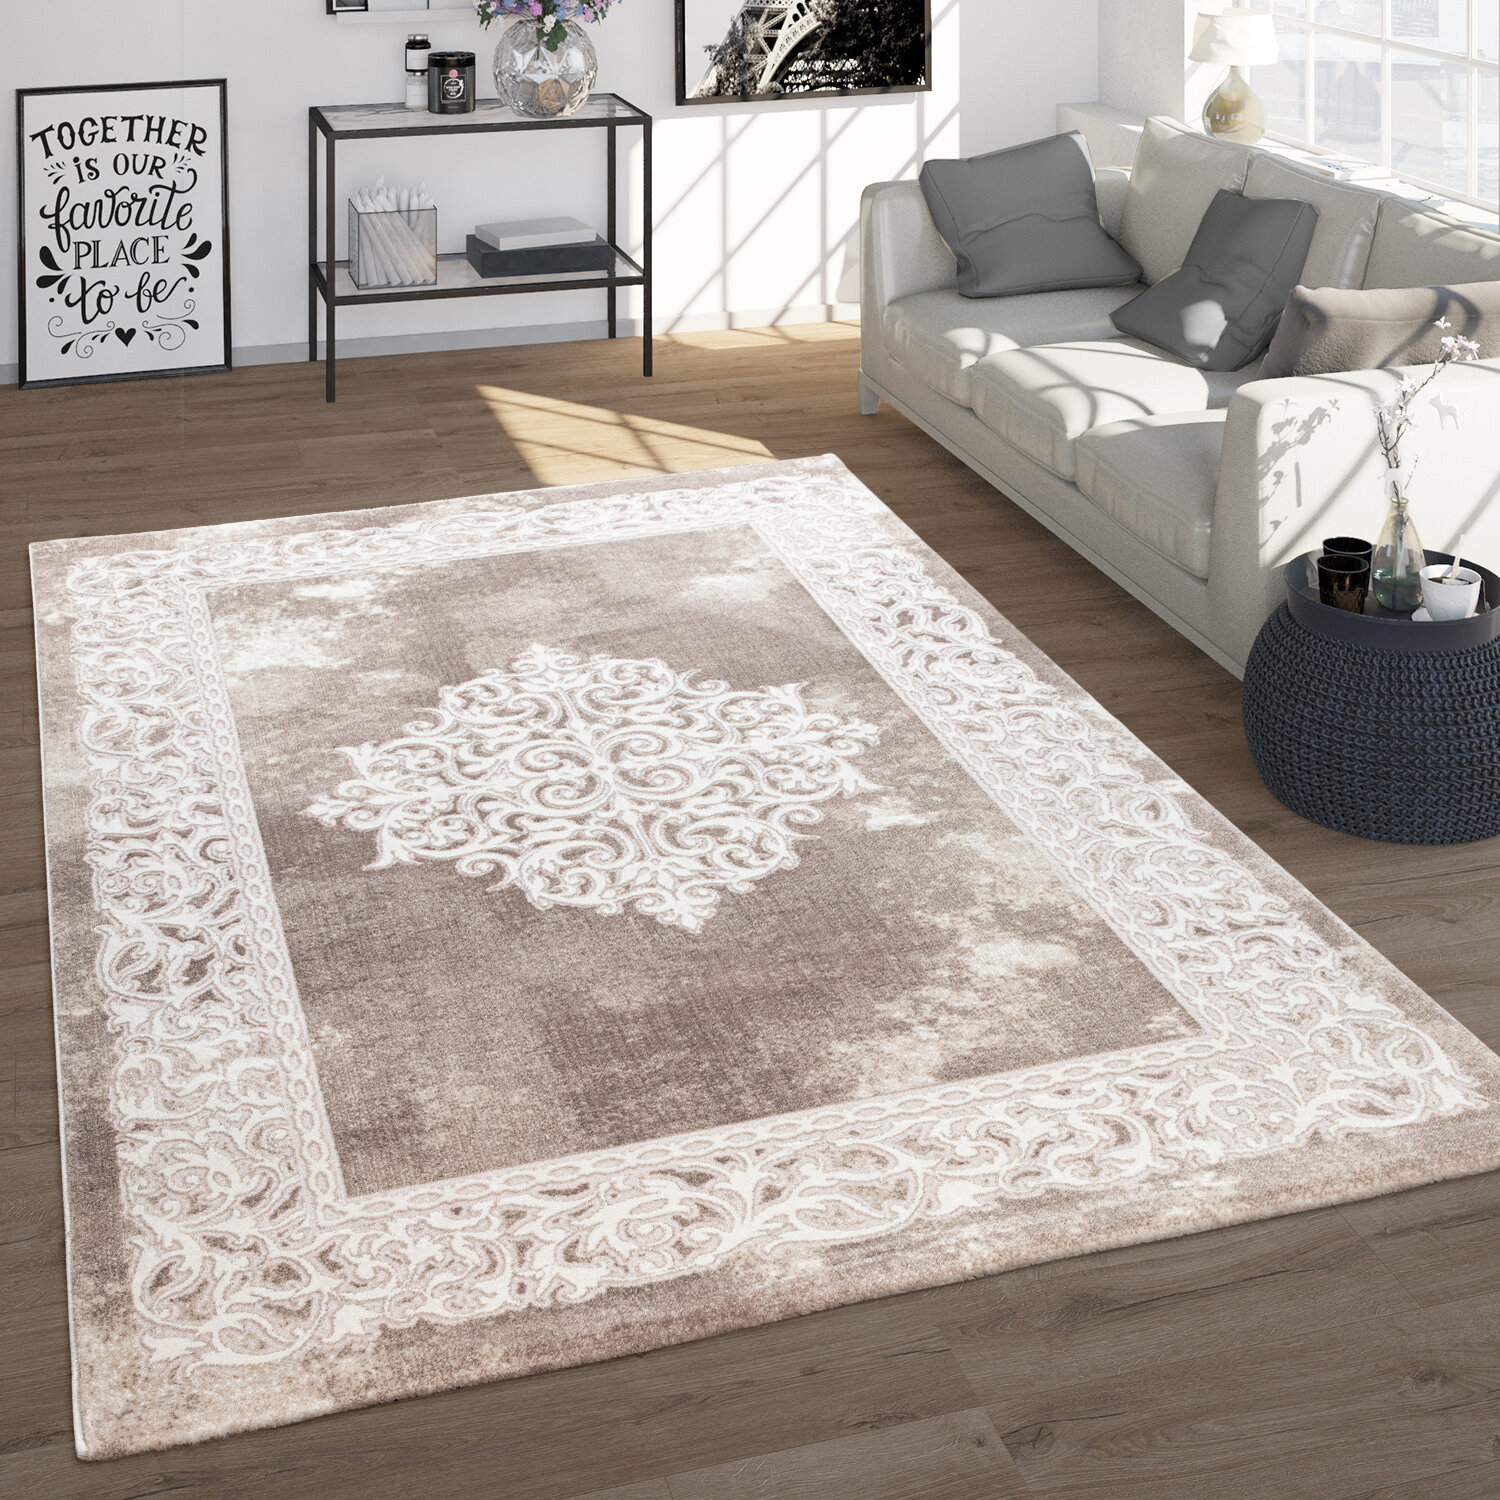 Area Rug Beige Oriental Style Floor Carpet Small Large Sizes Low Pile 